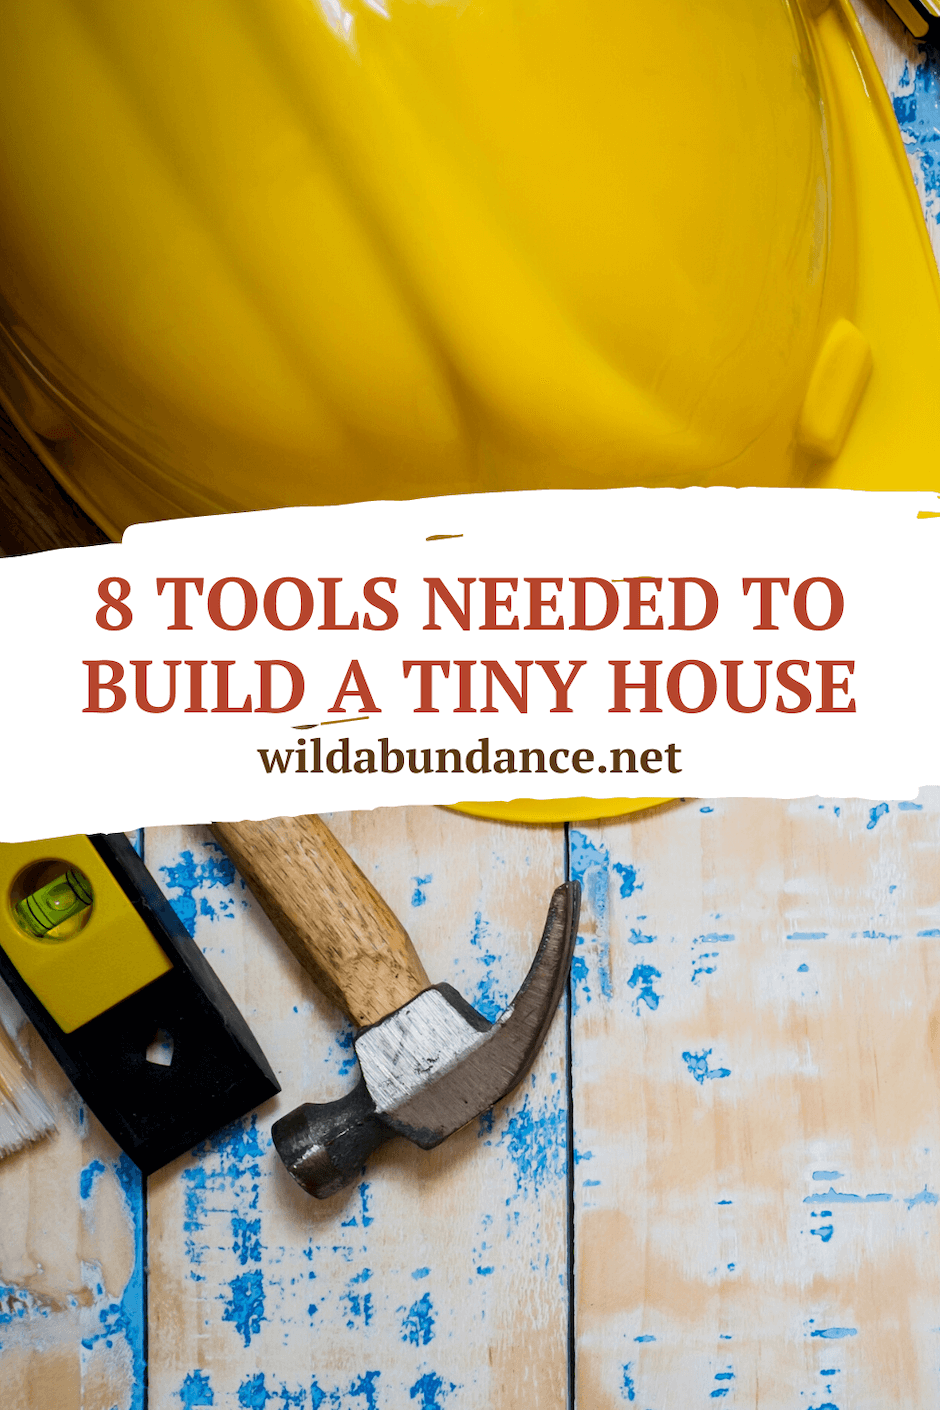 8 tools needed to build a tiny house